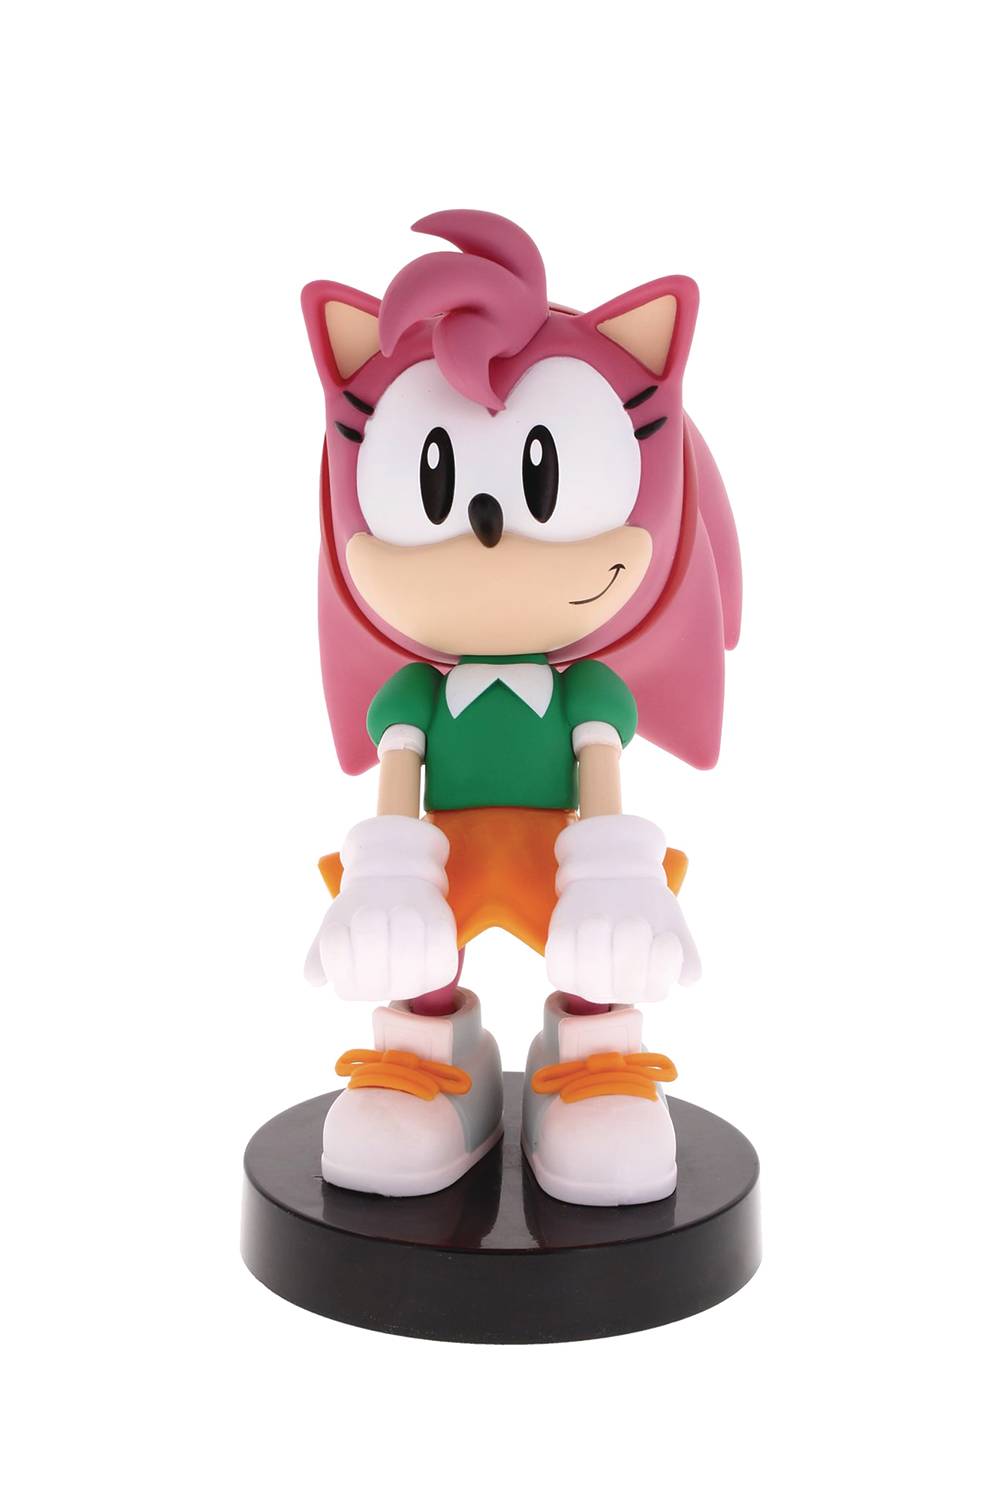 OCT228442 - SONIC THE HEDGEHOG AMY ROSE CABLE GUY - Previews World